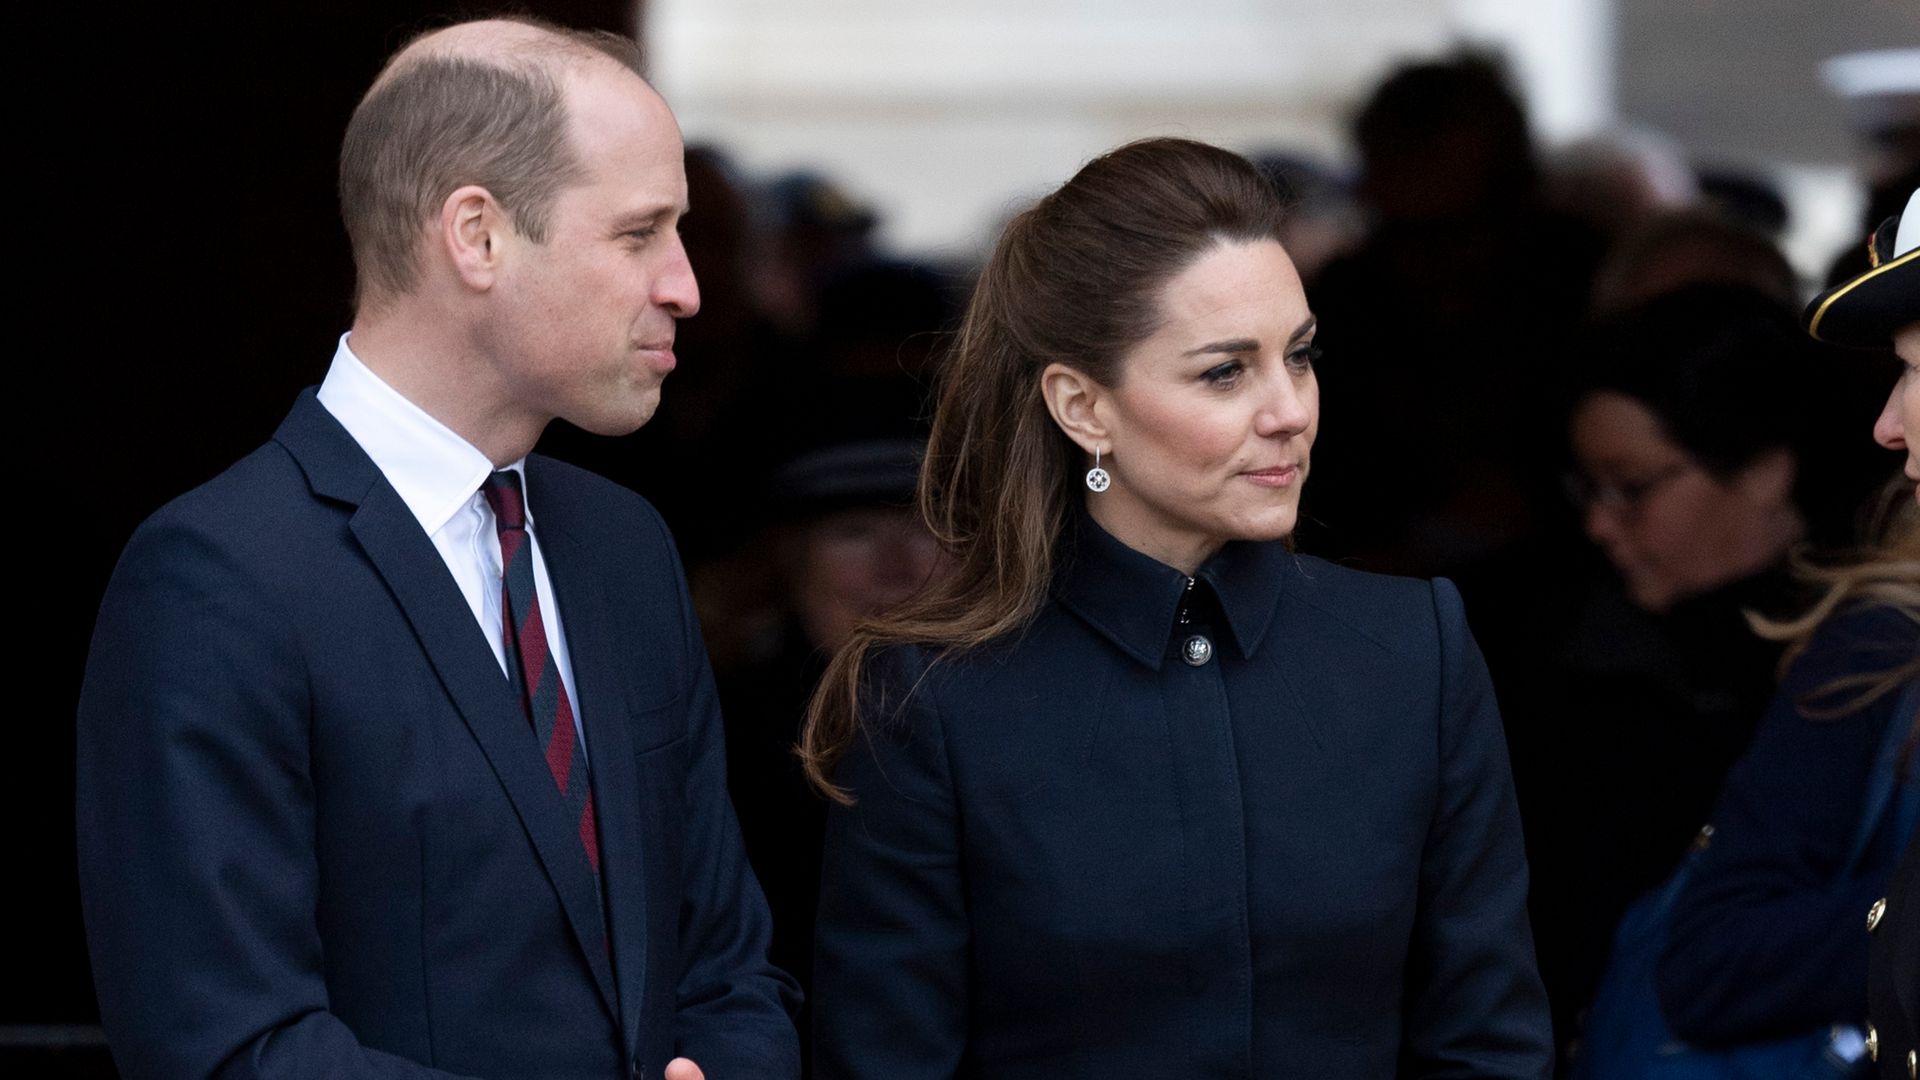 william-clasping-hands-kate-middleton-black-coat